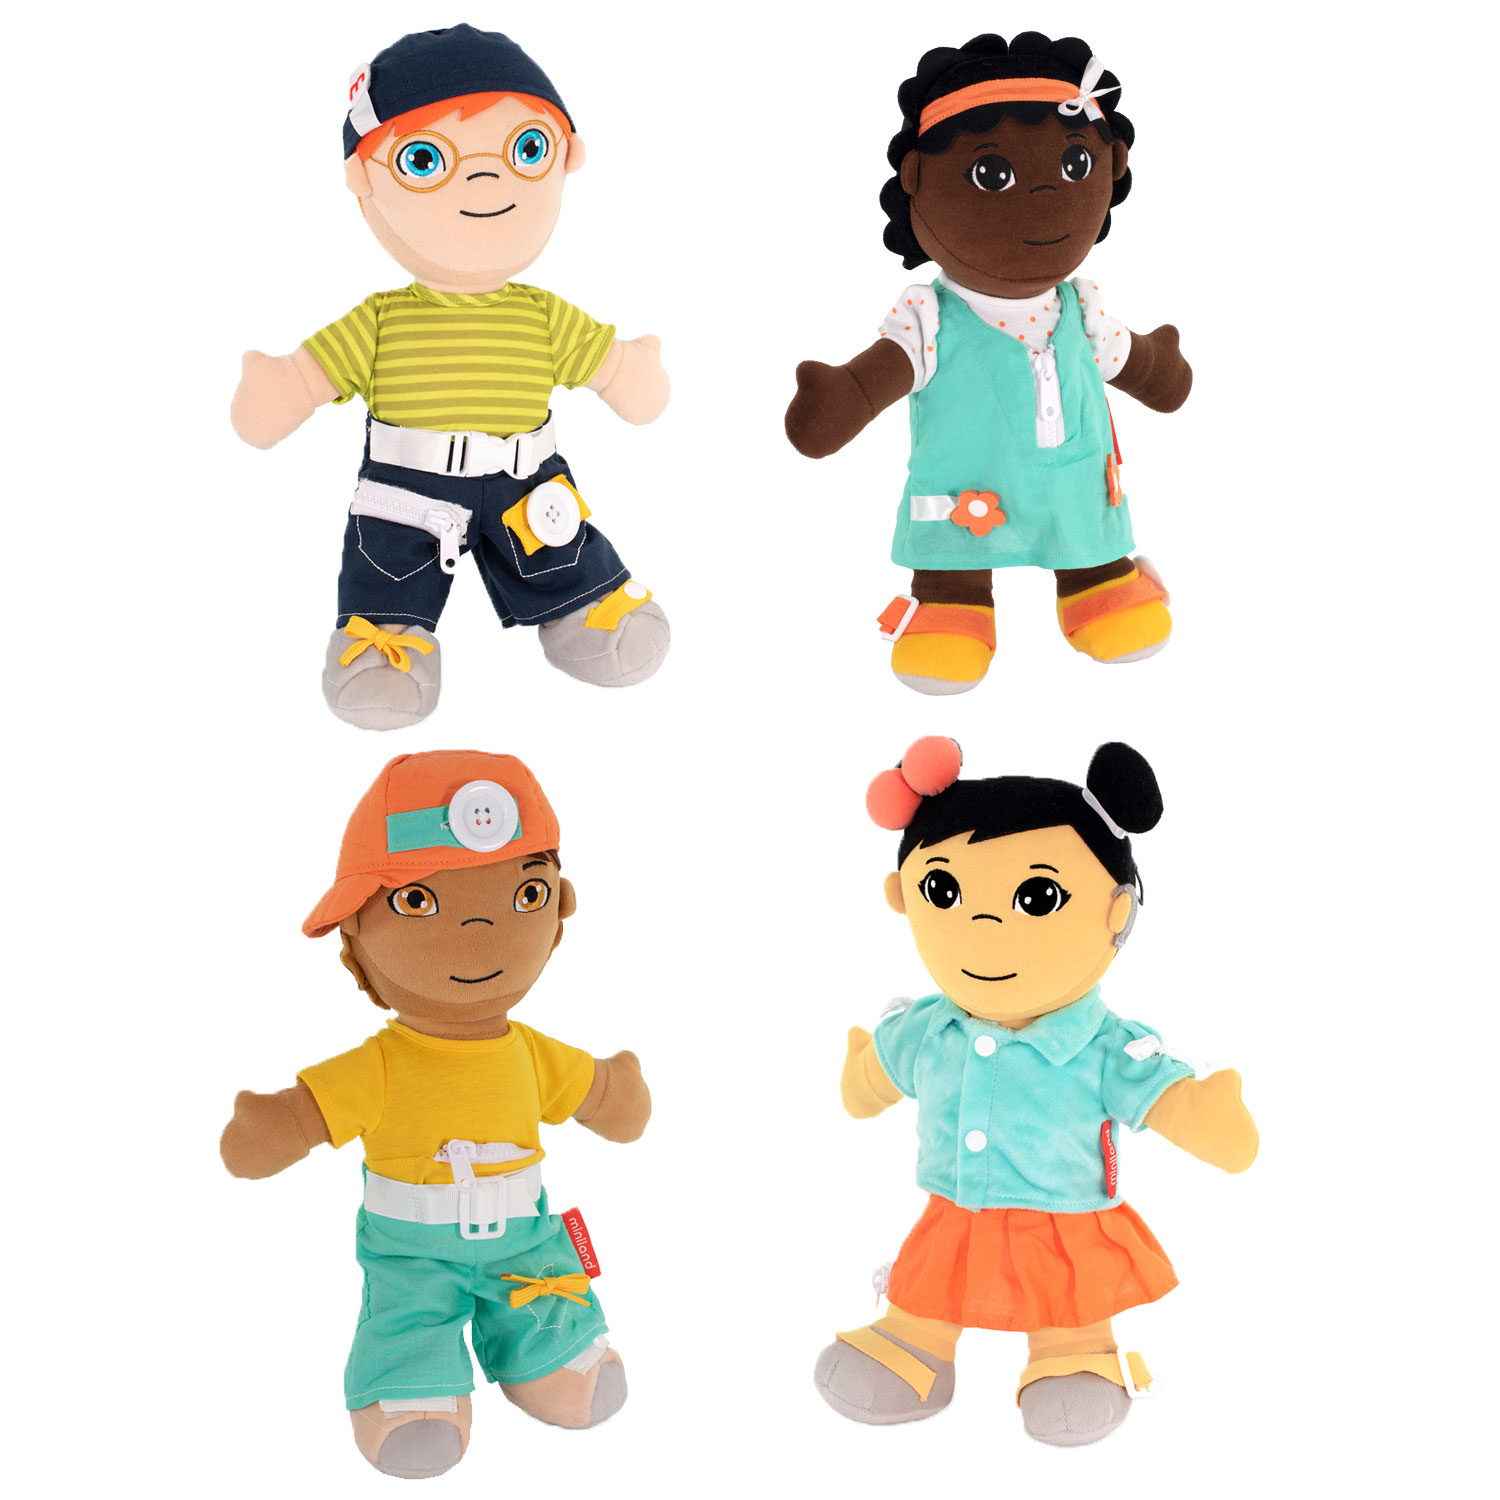 Diverse Learn To Dress Dolls